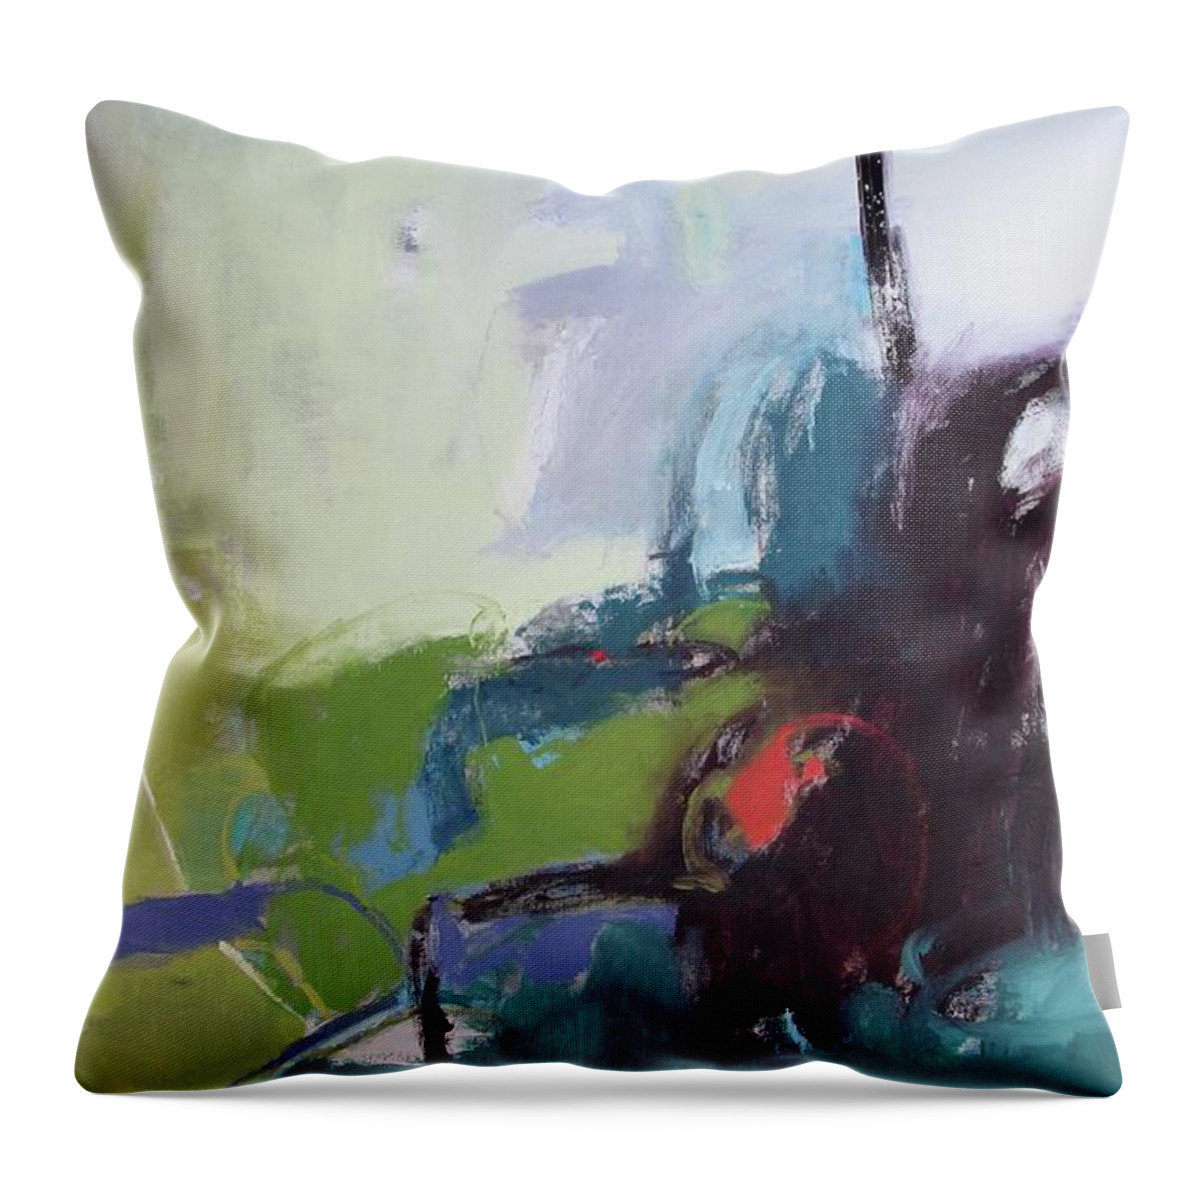 The Whale Throw Pillow featuring the painting The Whale by Chris Gholson